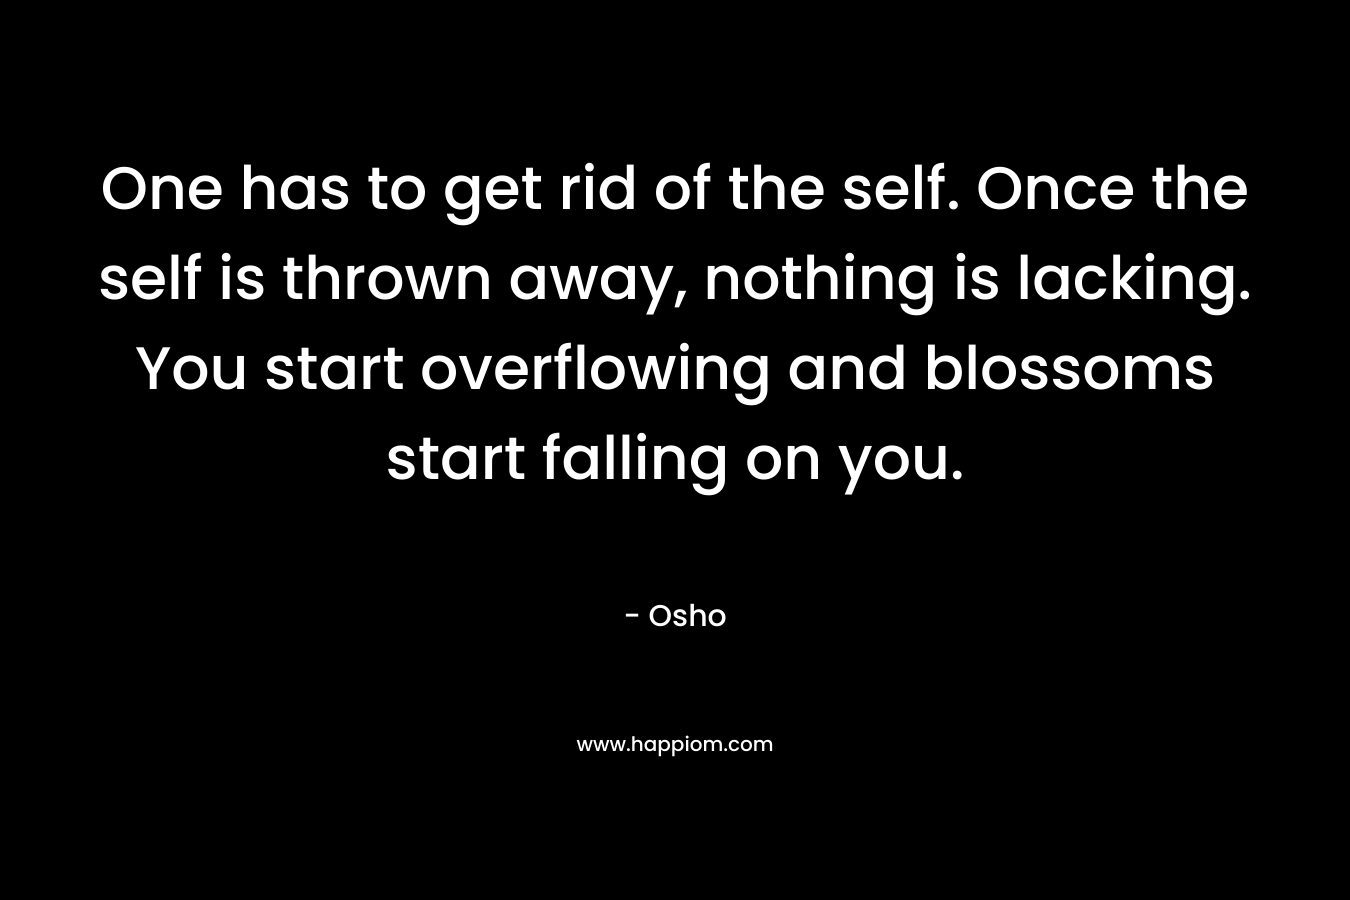 One has to get rid of the self. Once the self is thrown away, nothing is lacking. You start overflowing and blossoms start falling on you.